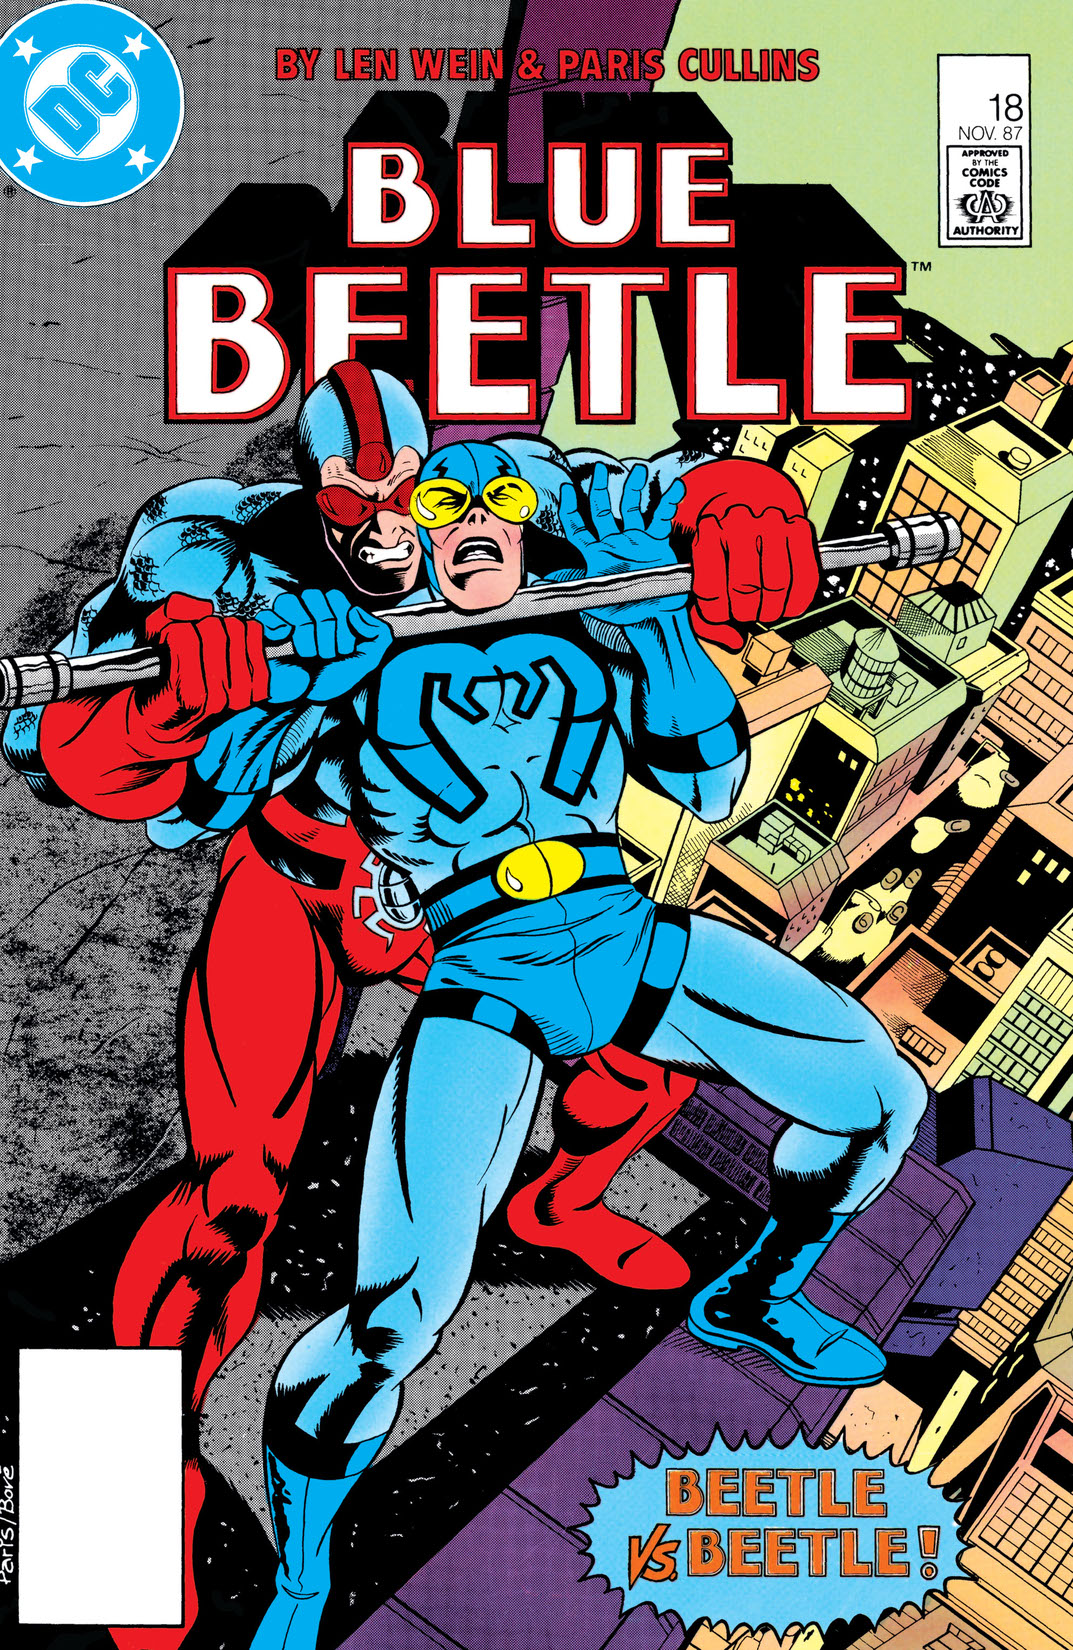 Blue Beetle (1986-) #18 preview images